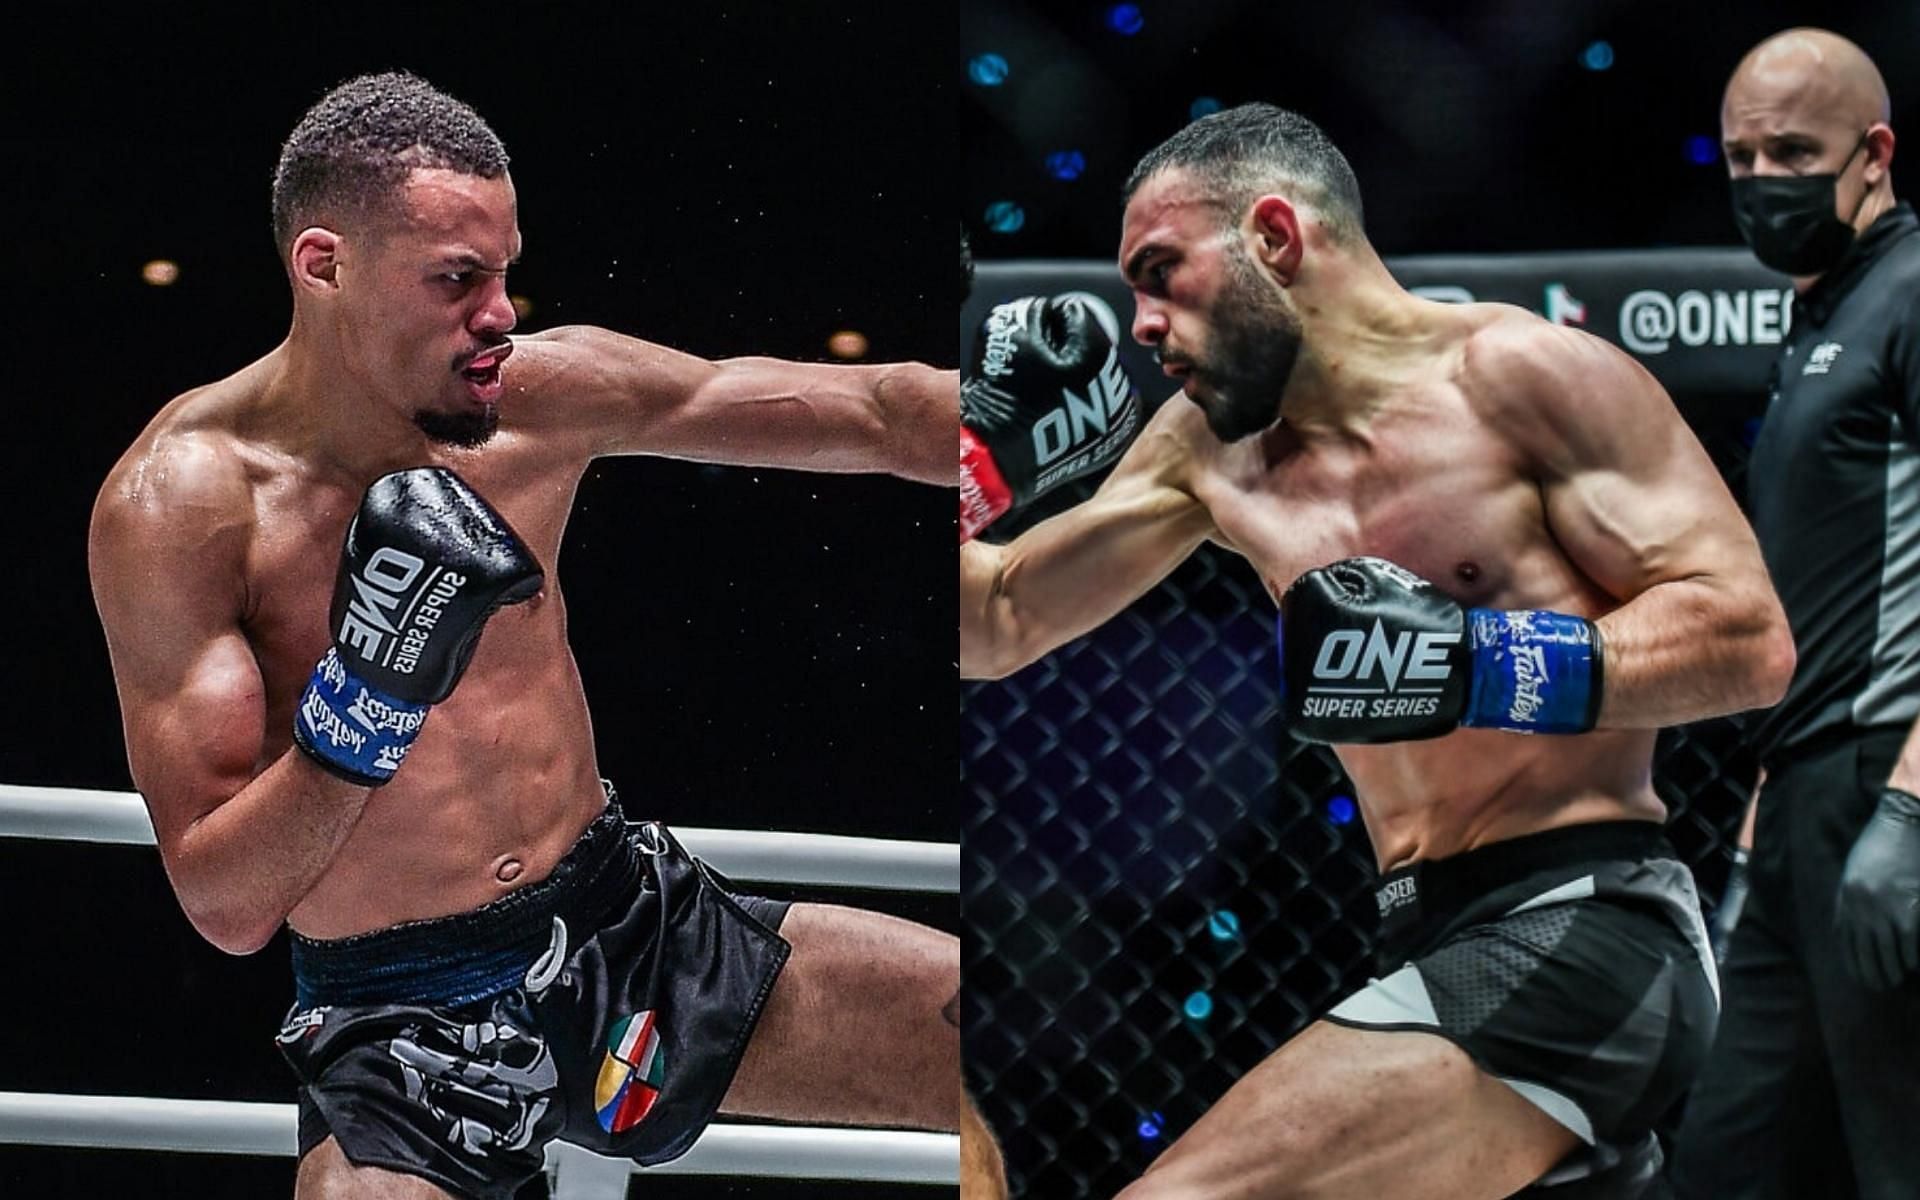 ONE lightweight kickboxing champion Regian Eersel (left) will defend his belt against Arian Sadikovic (right) in the main event of ONE 156. (Images courtesy of ONE Championship)